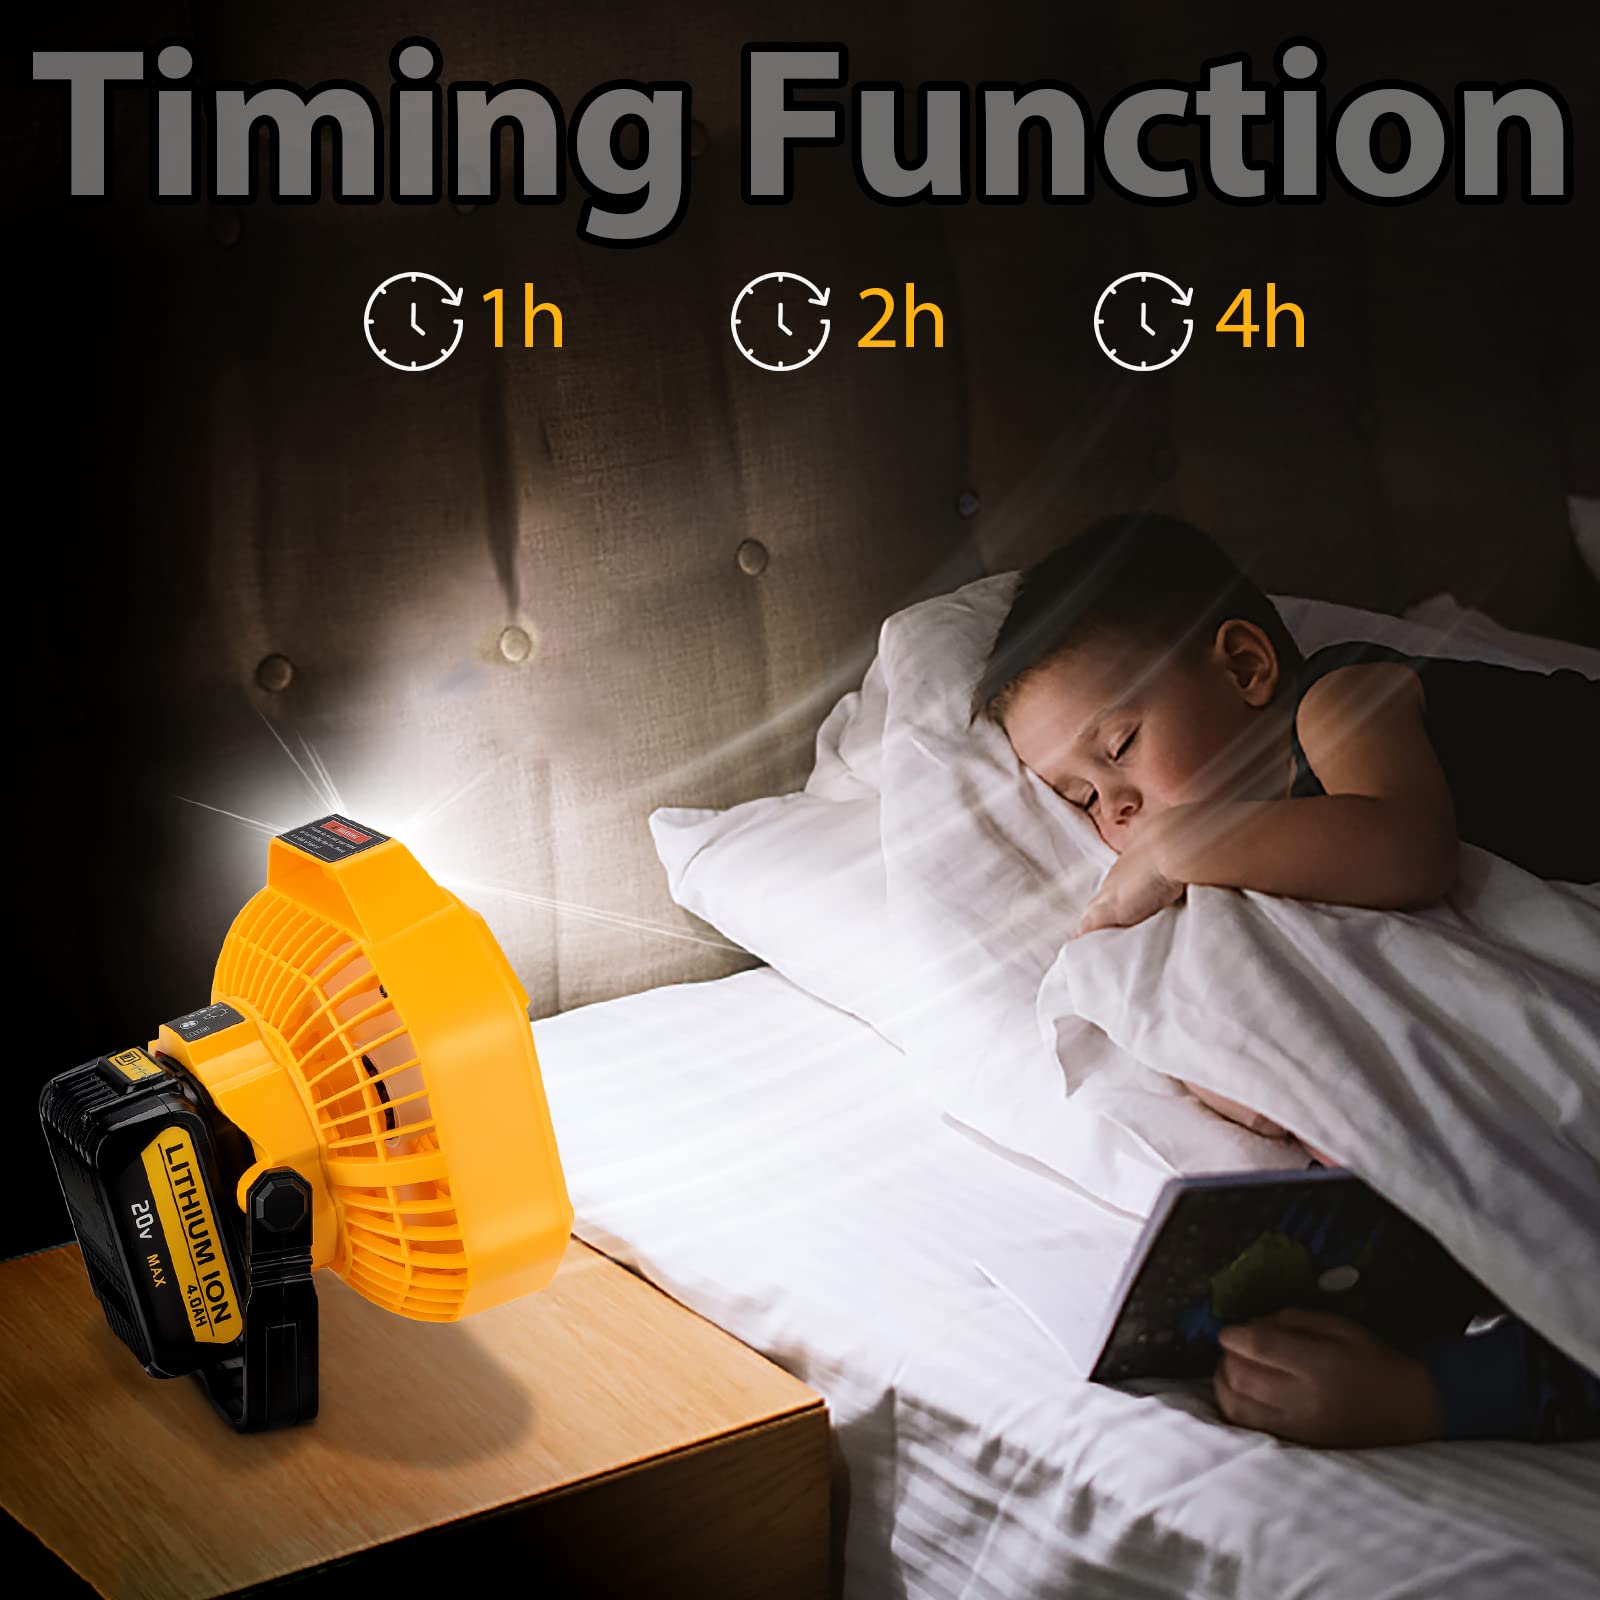 Cordless Fan for Dewalt 20v Max Battery,Portable Jobsite Fan with 3 Energy Efficient Speed Settings and 300LM Led Work Light，Battery Operated Fan for Bedroom Home Camping Tent Office (Tool Only)